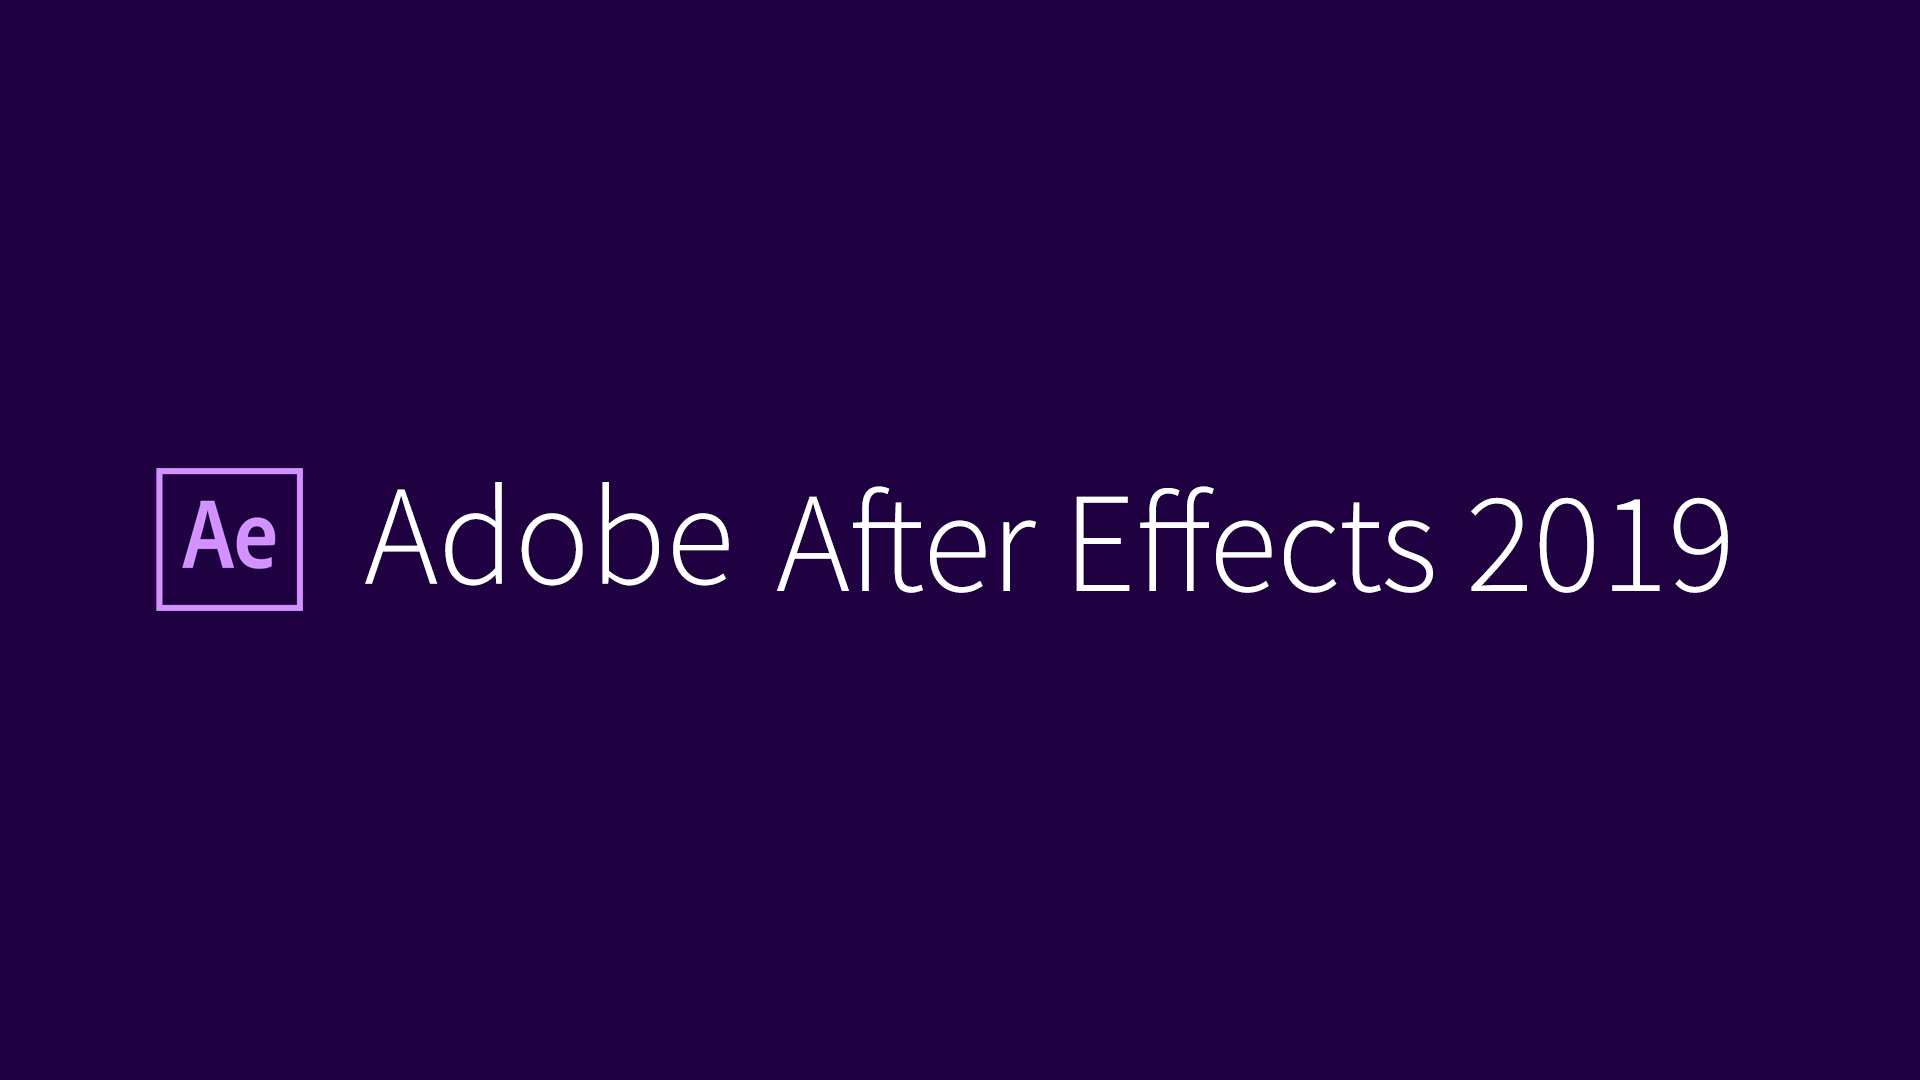 Adobe effects 2019. Adobe after Effects. Adobe after Effects логотип. Adobe after Effects 2019. Adobe after Effects cc 2019.